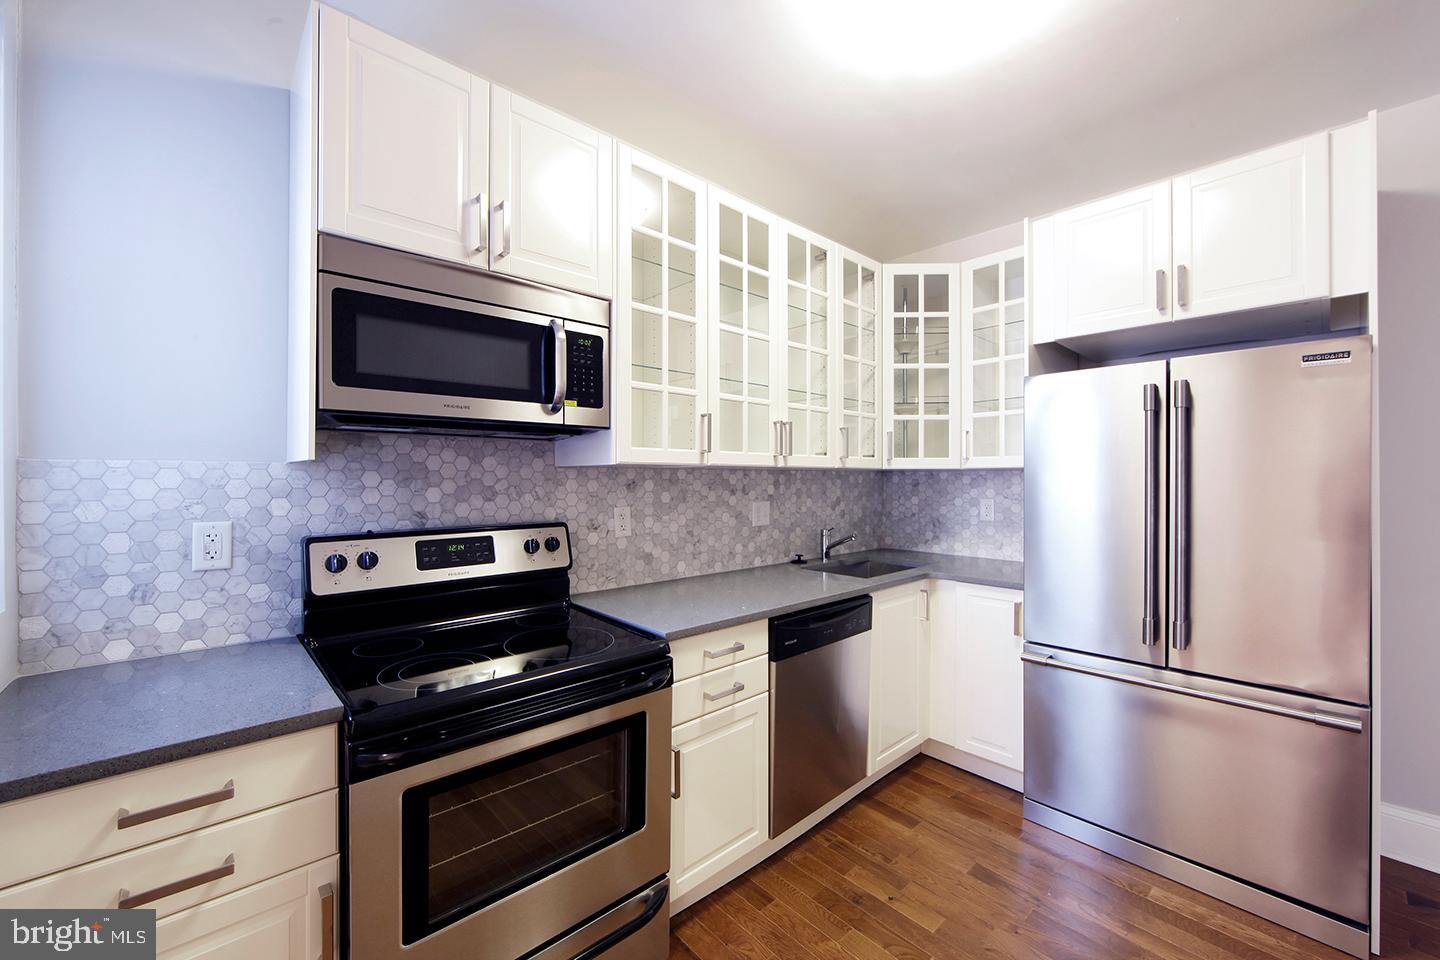 a kitchen with stainless steel appliances a refrigerator microwave and stove top oven